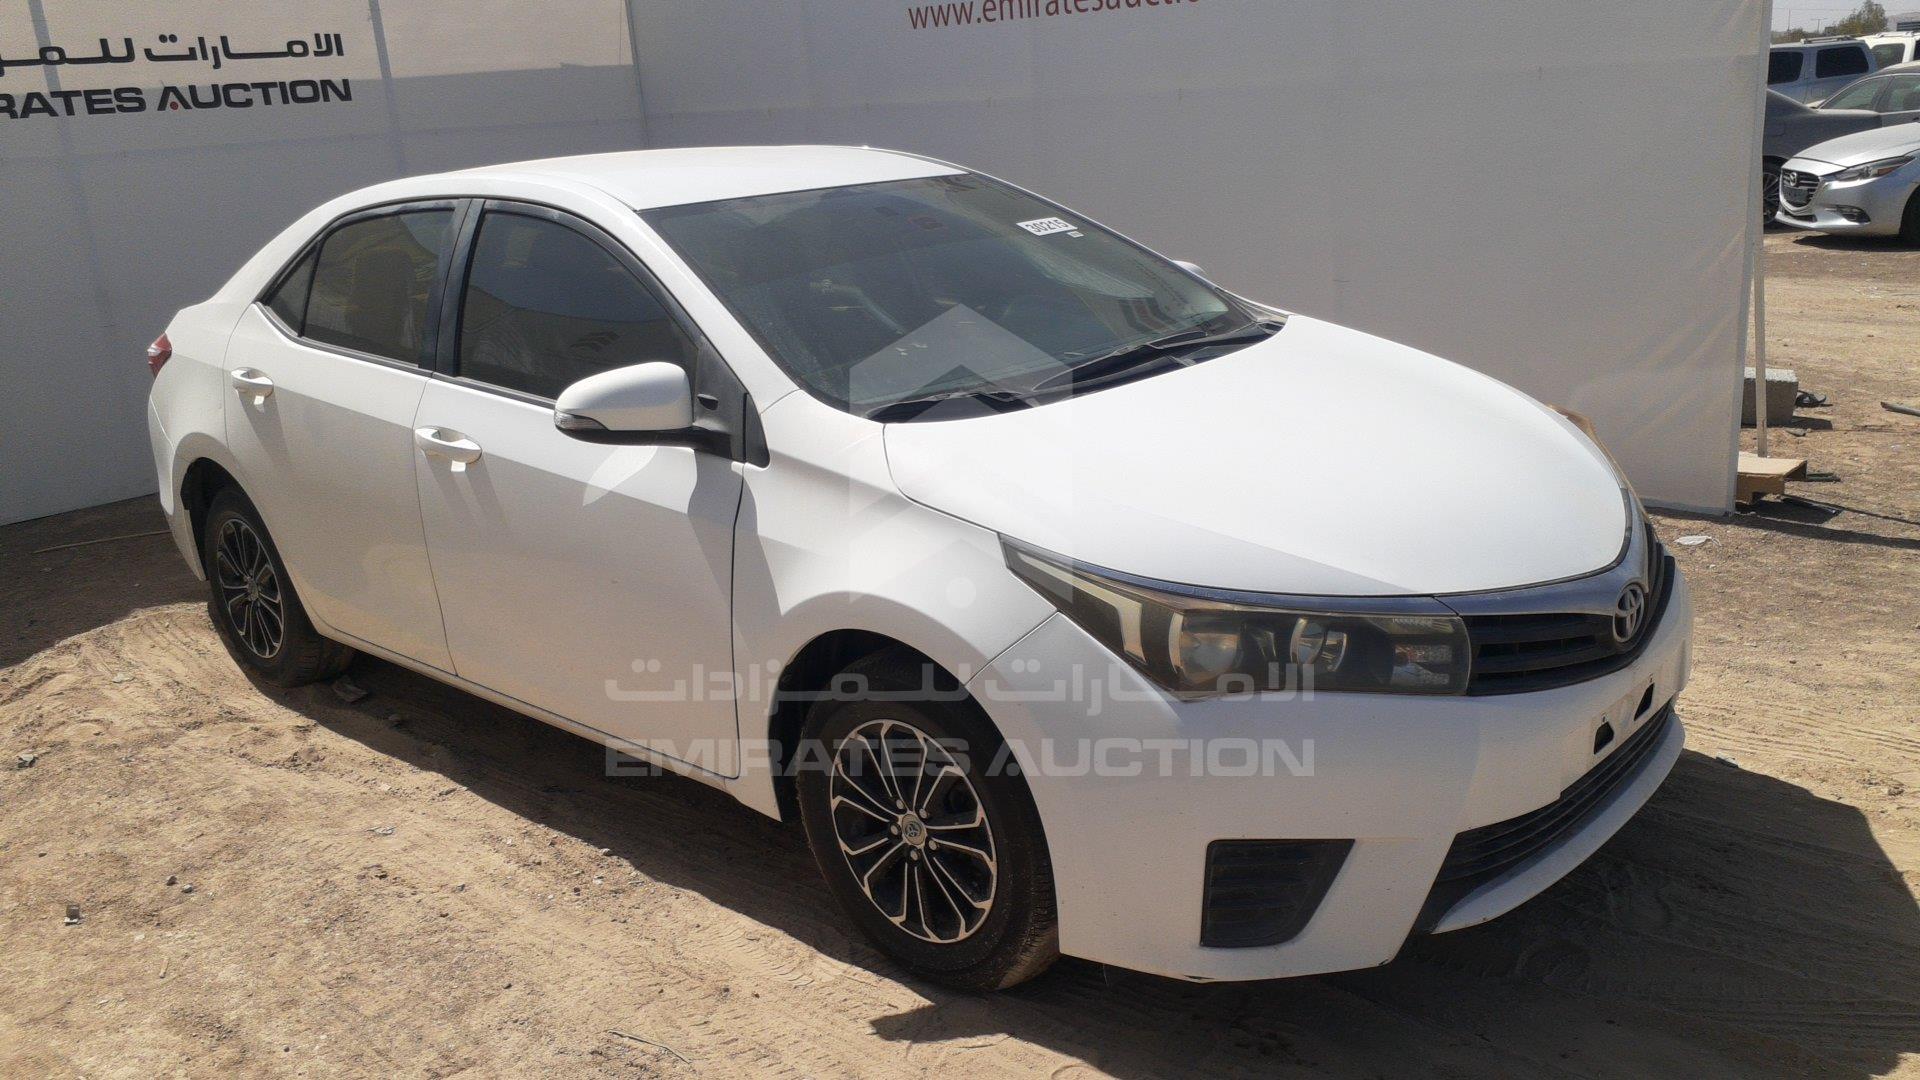 image 5 4 - corolla 2014 price 7000 in auction